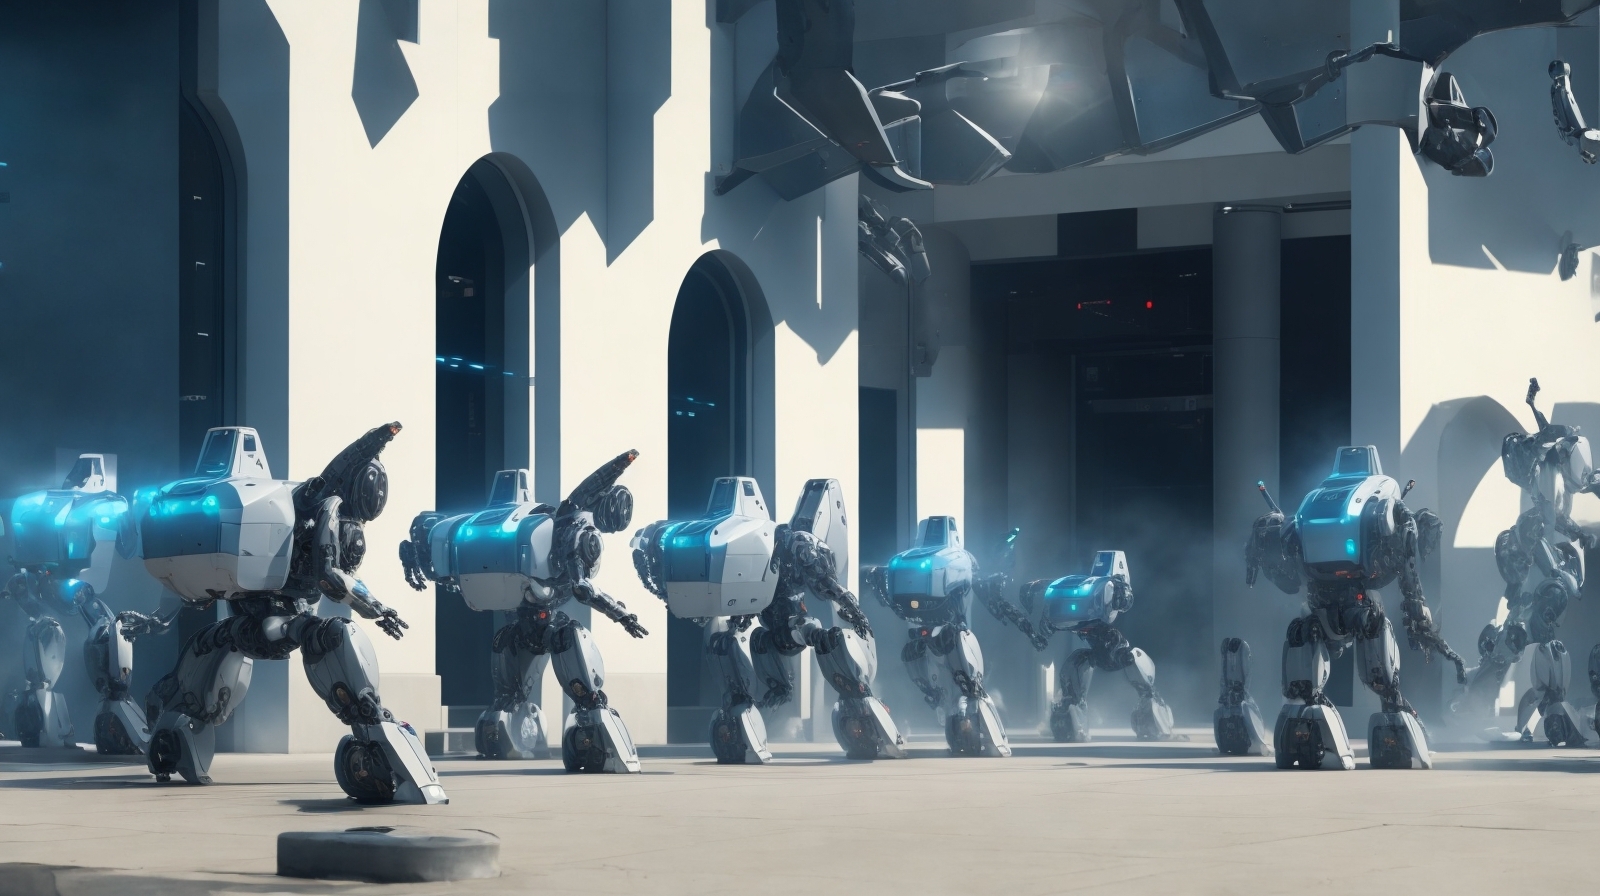 Default_A_robotic_army_of_AI_machines_storming_the_gates_of_an_0